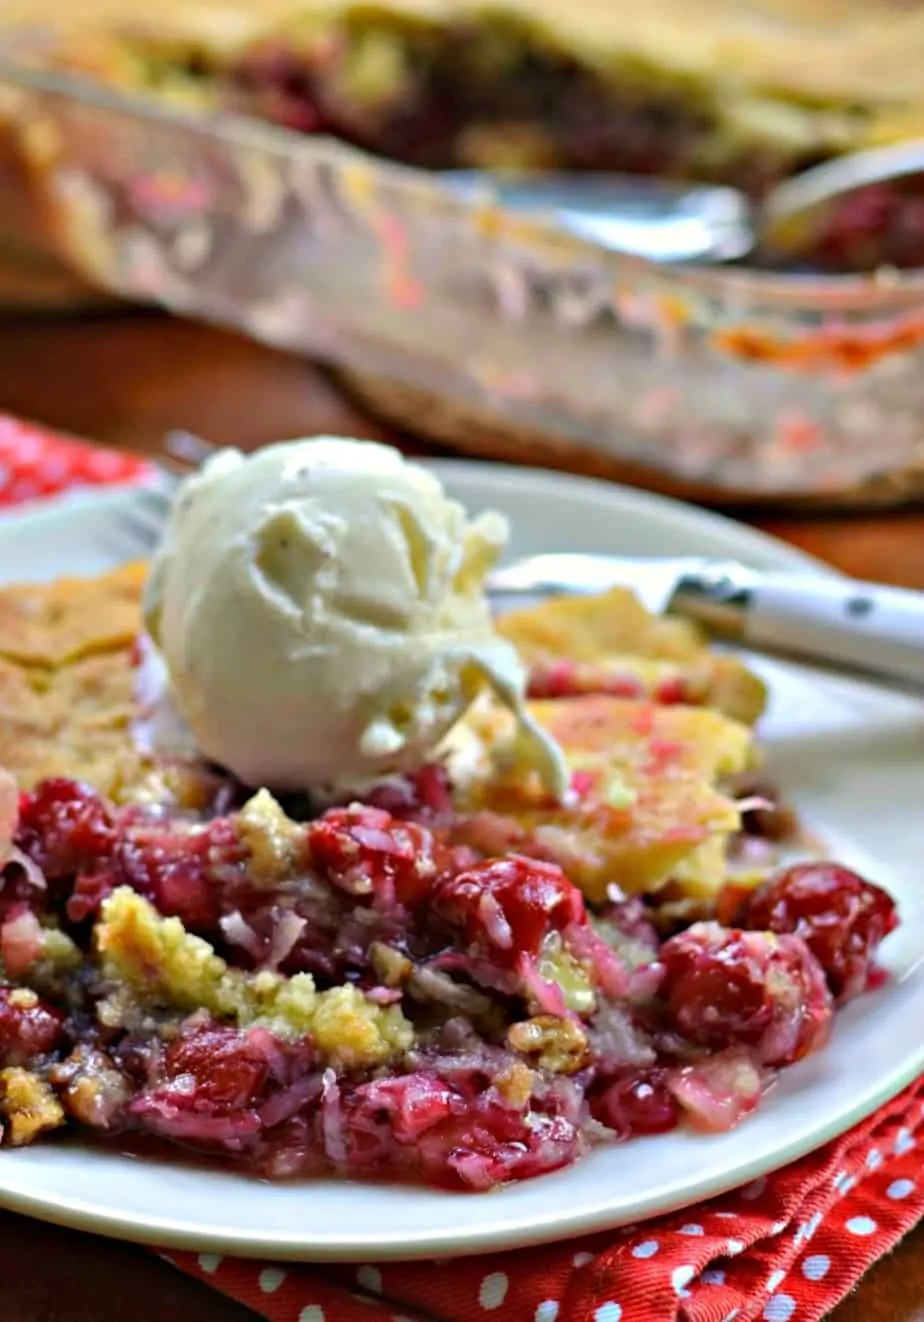 Cherry Dump Cake is an amazingly delicious easy dessert that takes less than ten minutes to put together.